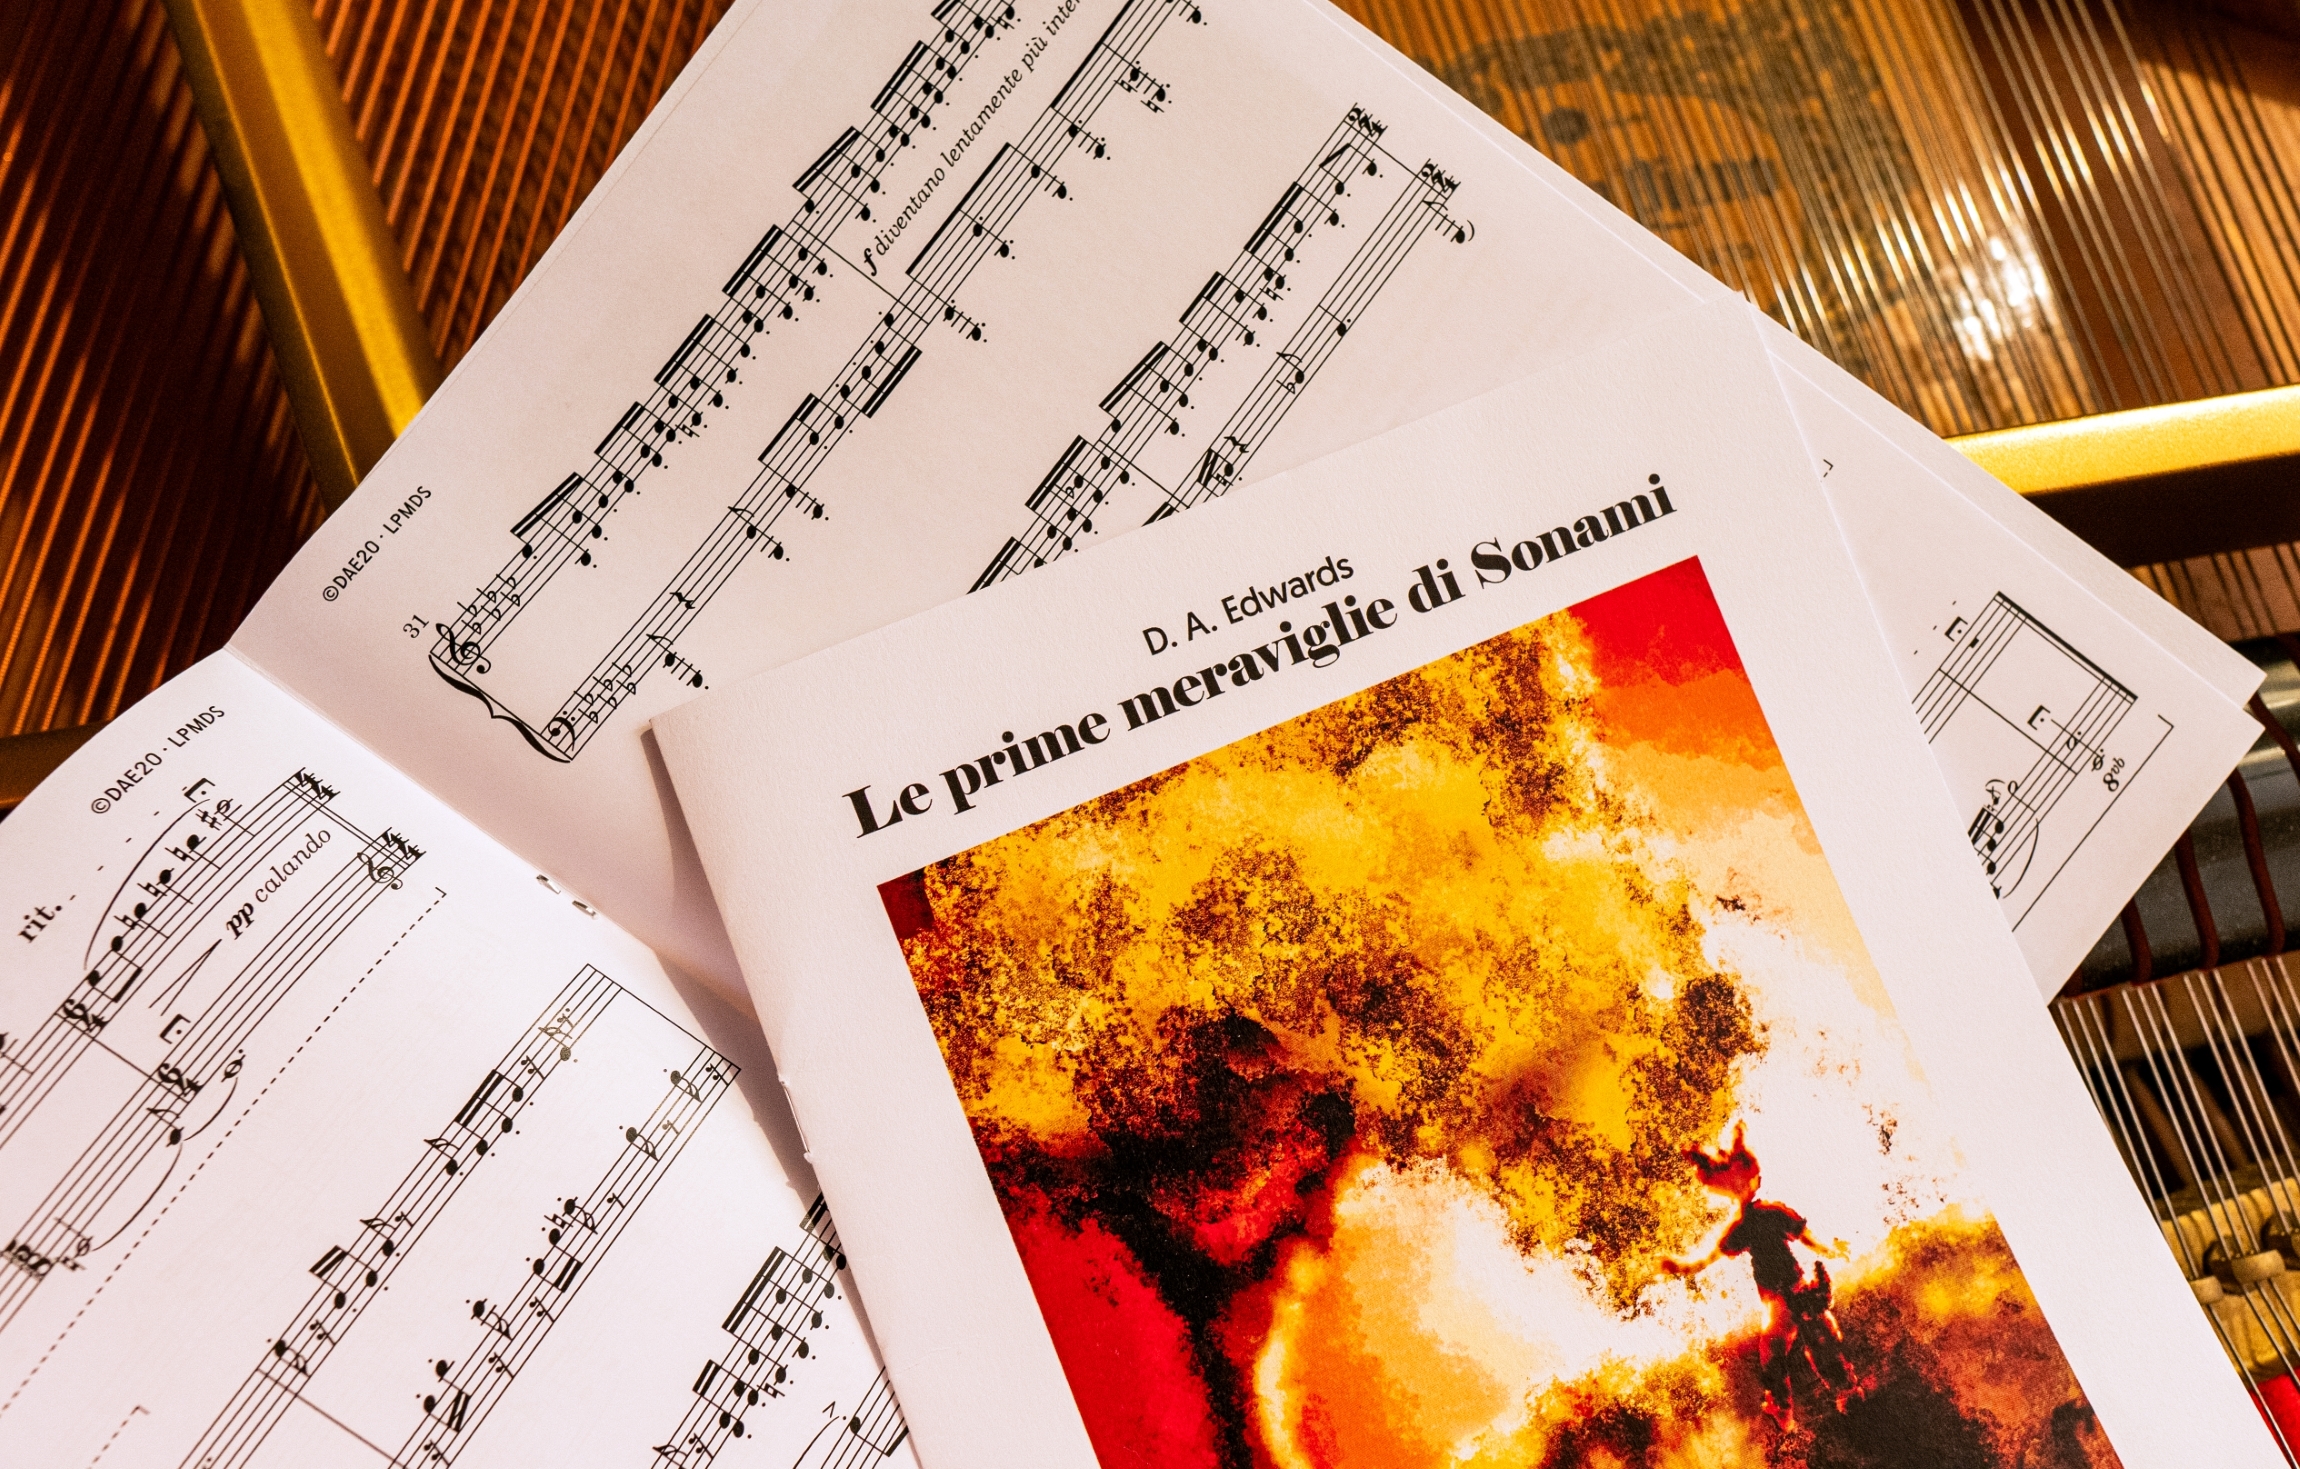 Sheet music print edition with full color cover